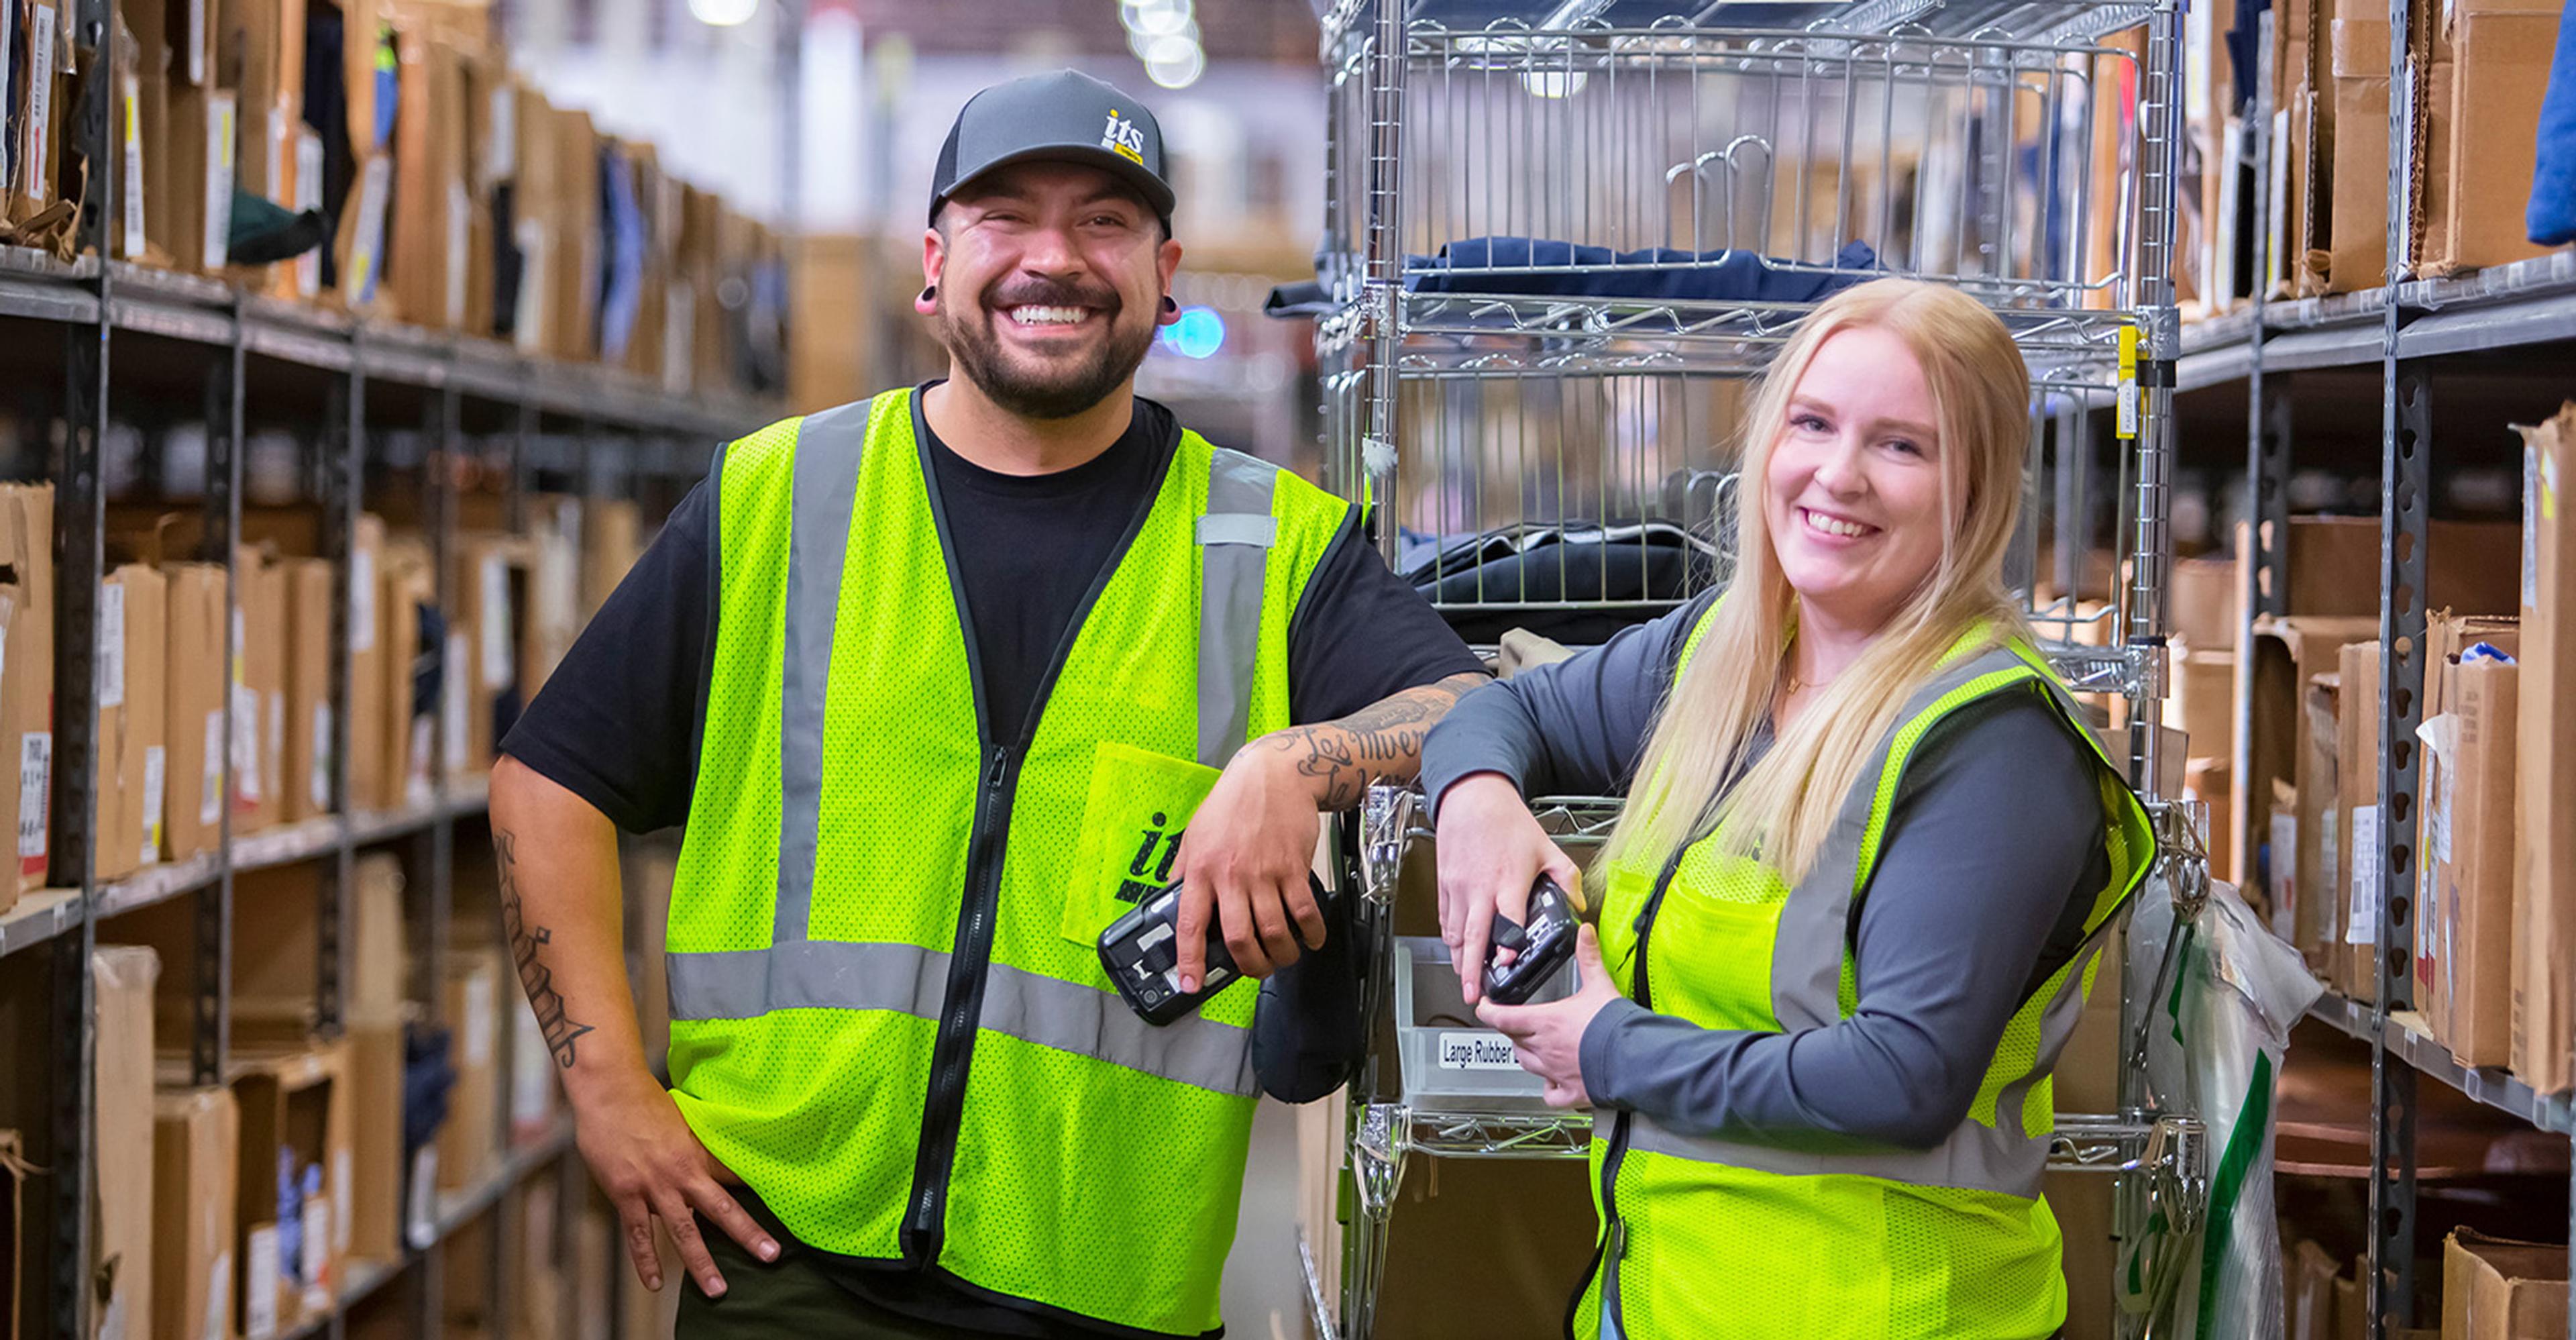 Two ITS team members working in a warehouse aisle